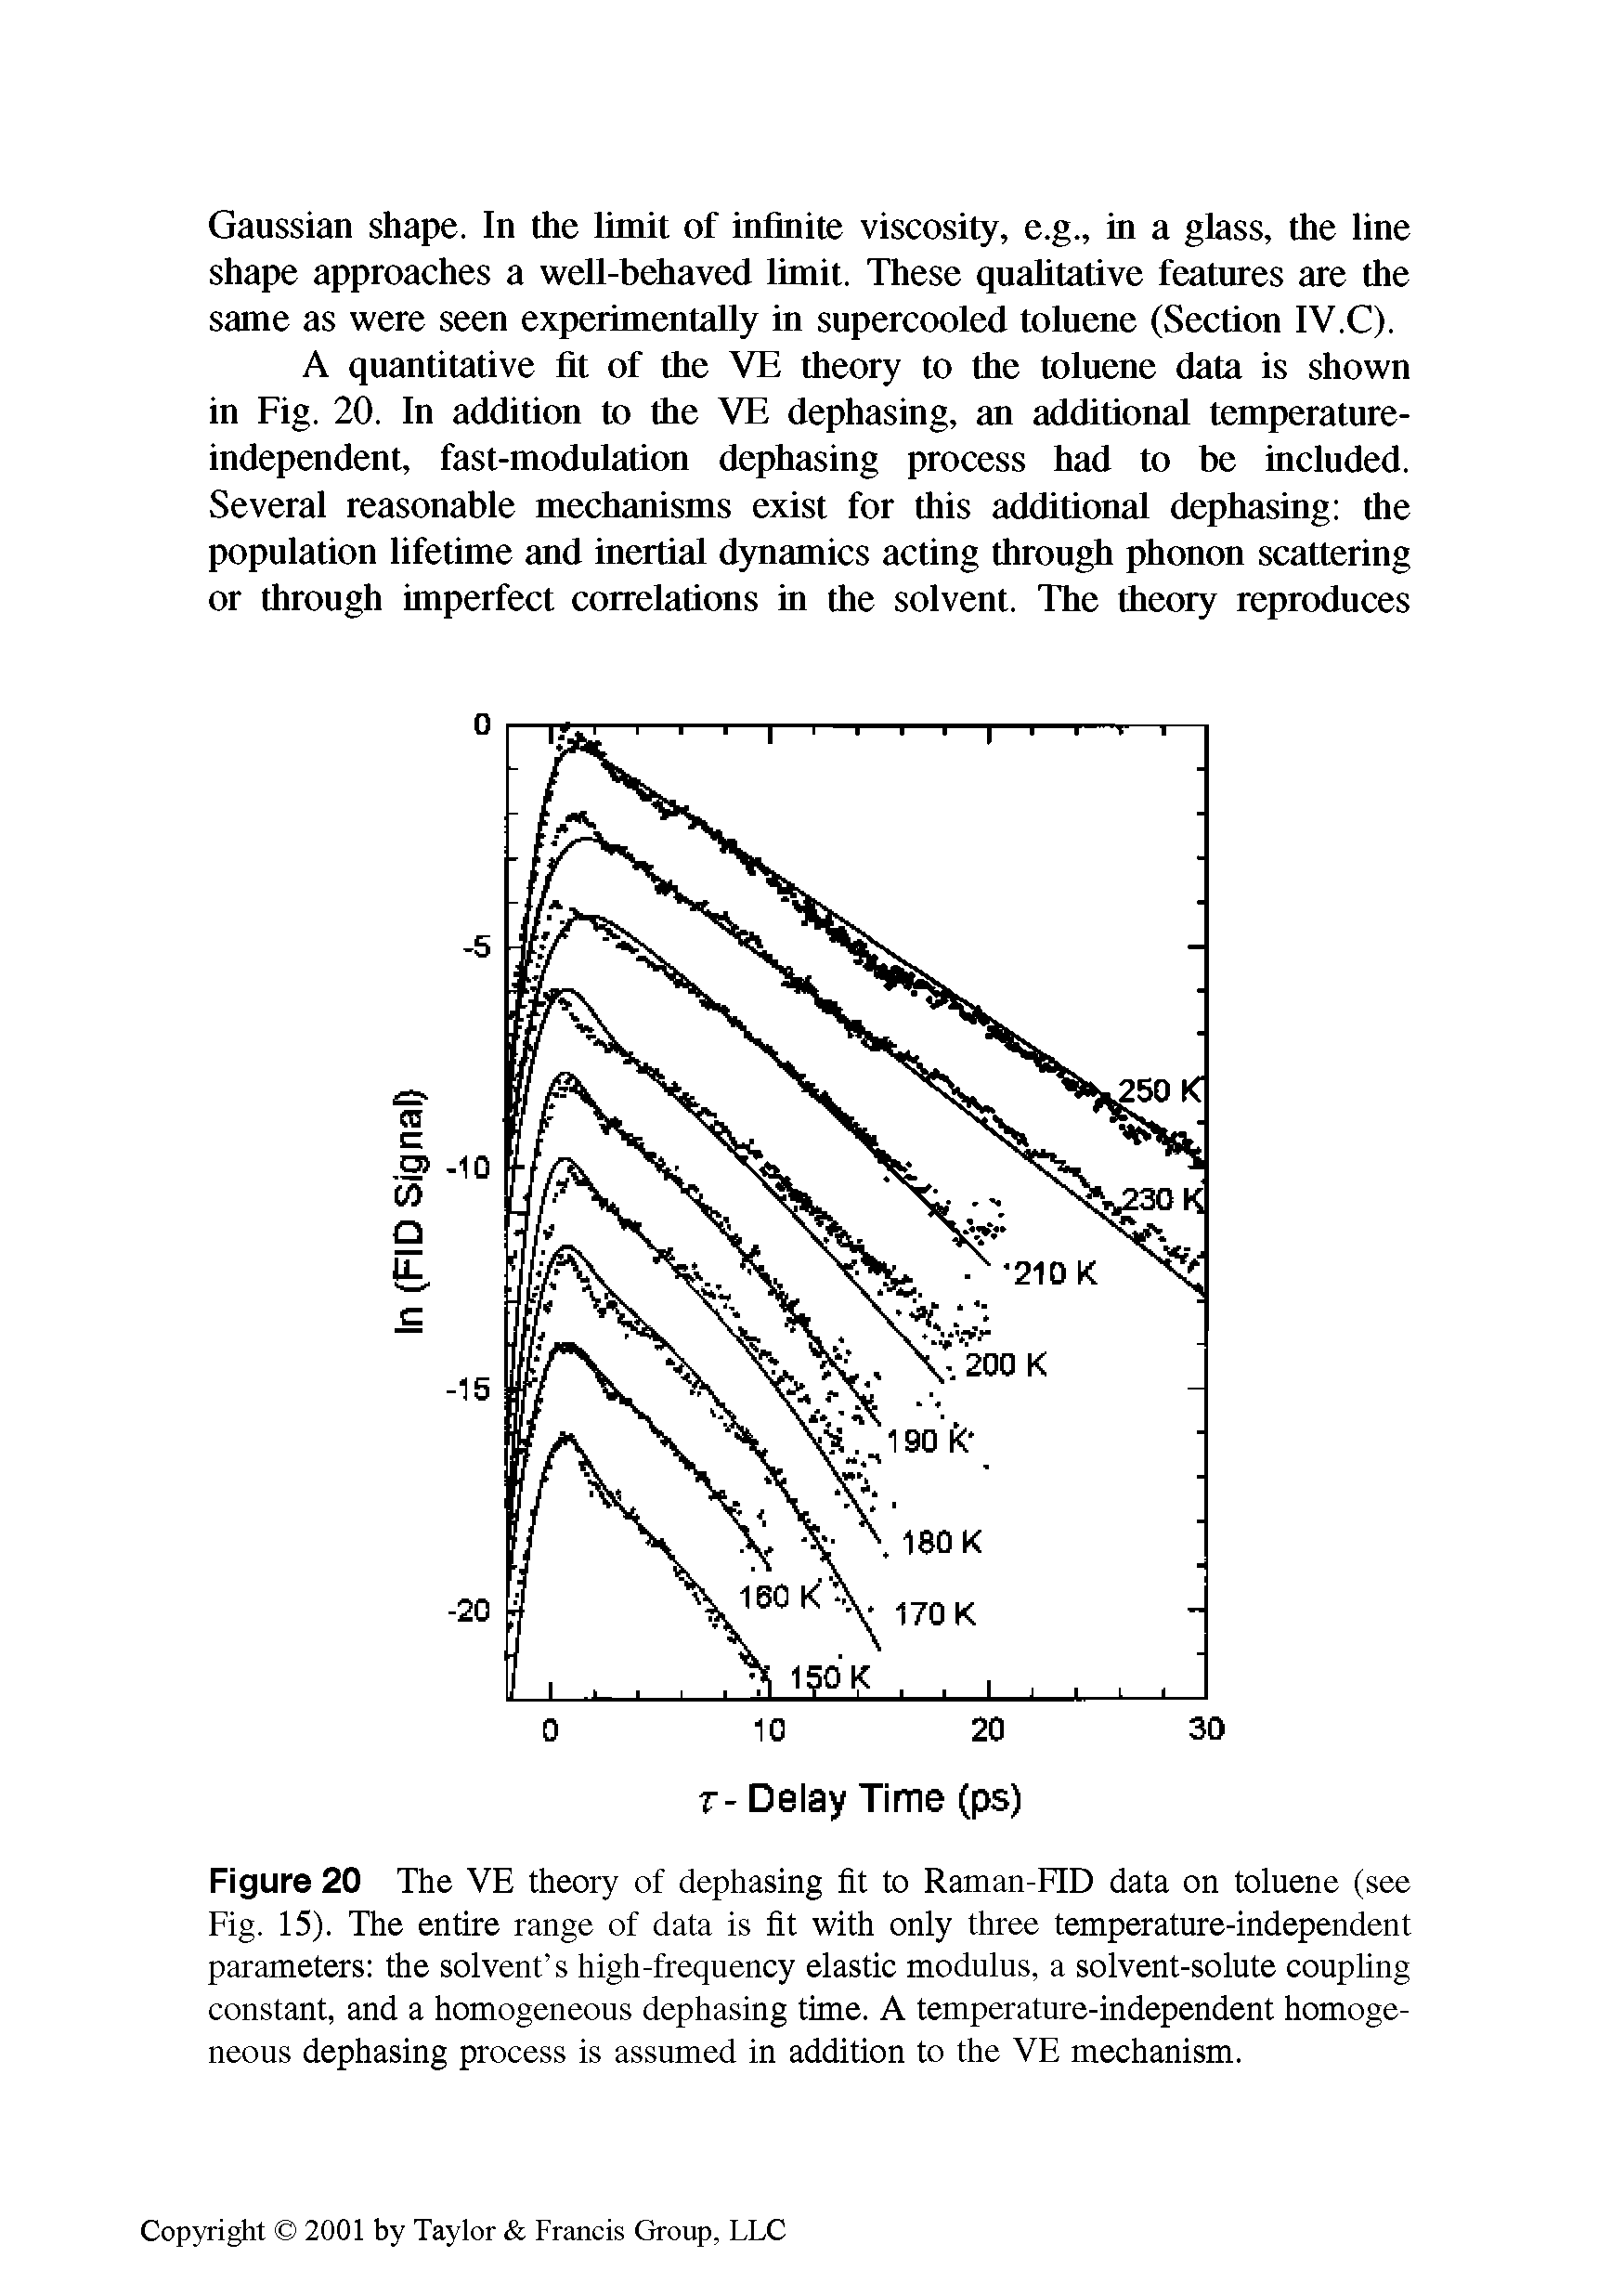 Figure 20 The VE theory of dephasing fit to Raman-FID data on toluene (see Fig. 15). The entire range of data is fit with only three temperature-independent parameters the solvent s high-frequency elastic modulus, a solvent-solute coupling constant, and a homogeneous dephasing time. A temperature-independent homogeneous dephasing process is assumed in addition to the VE mechanism.